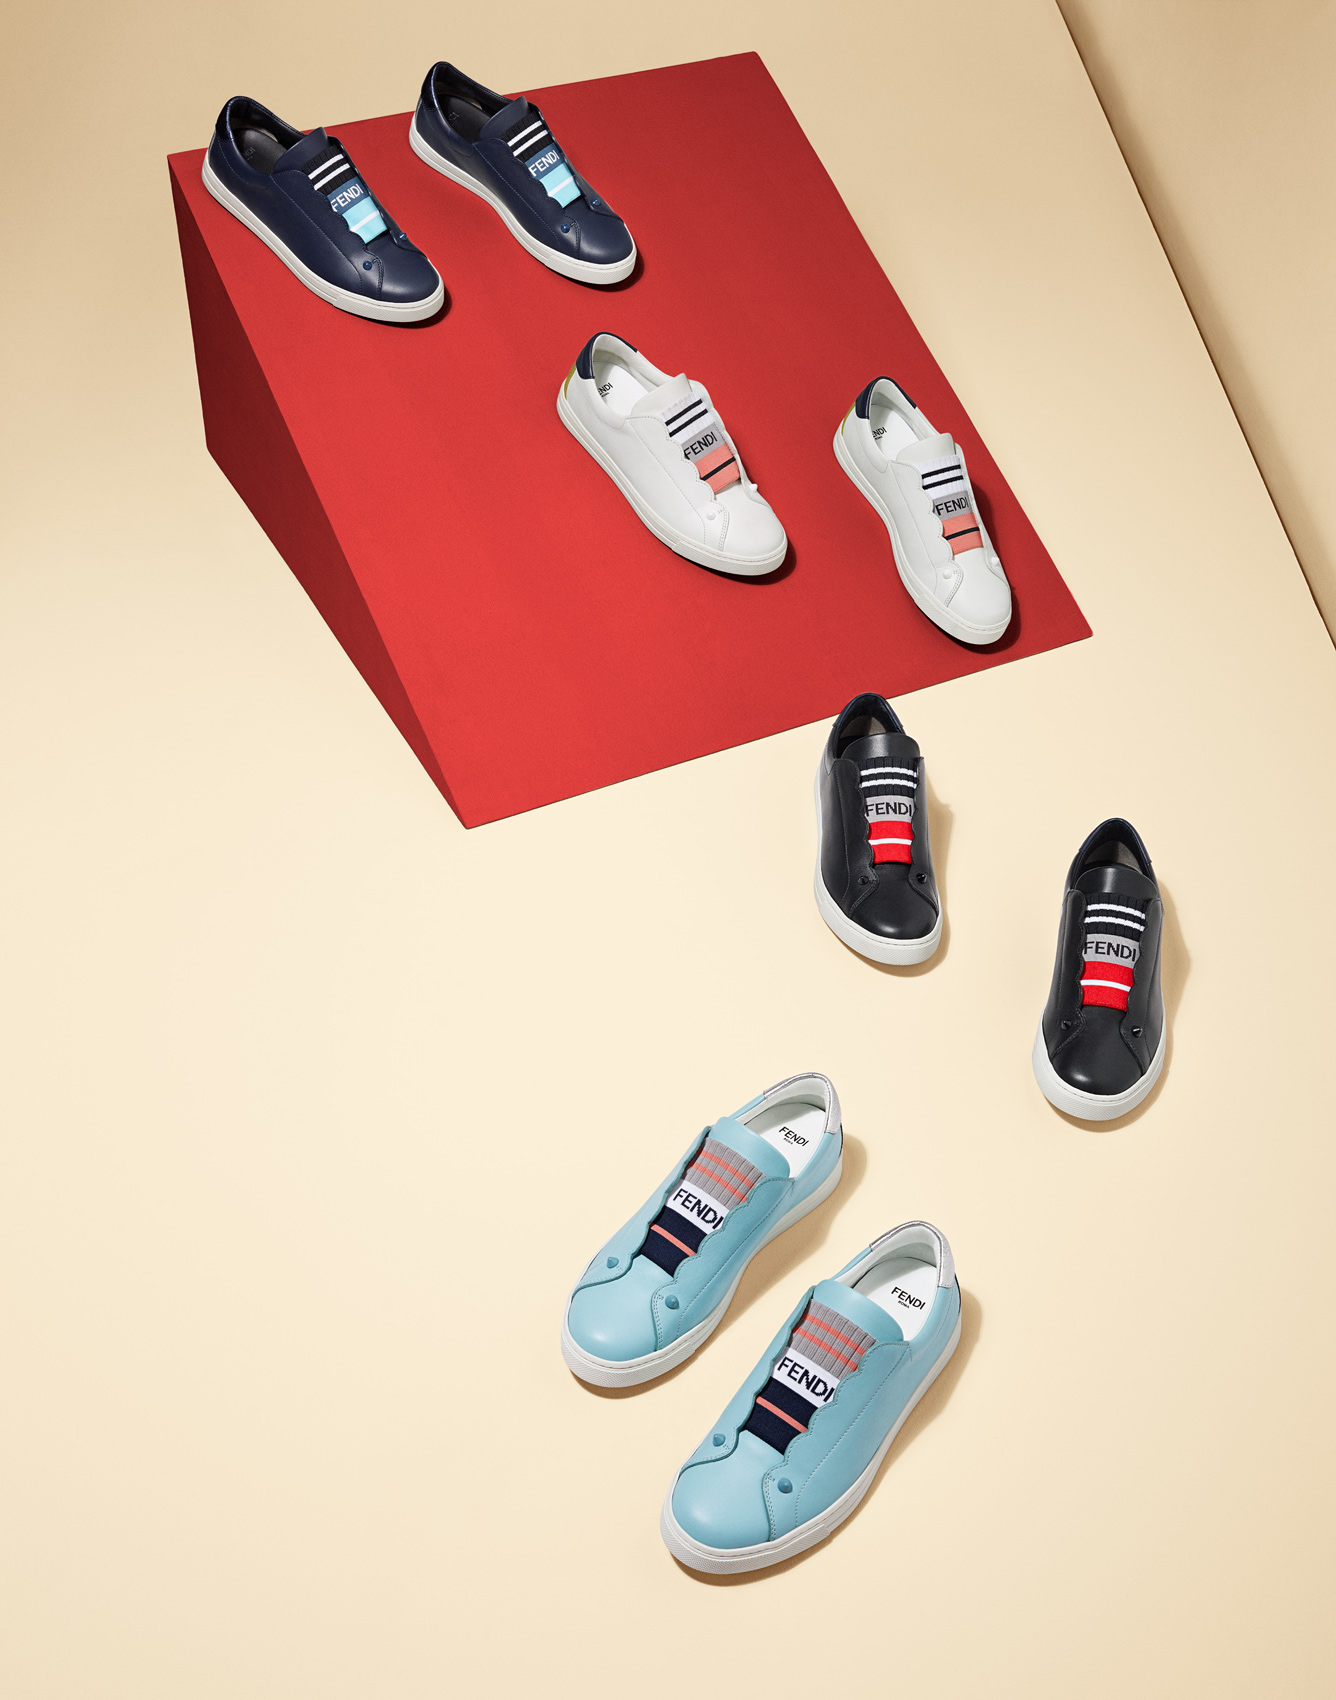 Group shoes photography by Alexander Kent London based still life and product photographer.